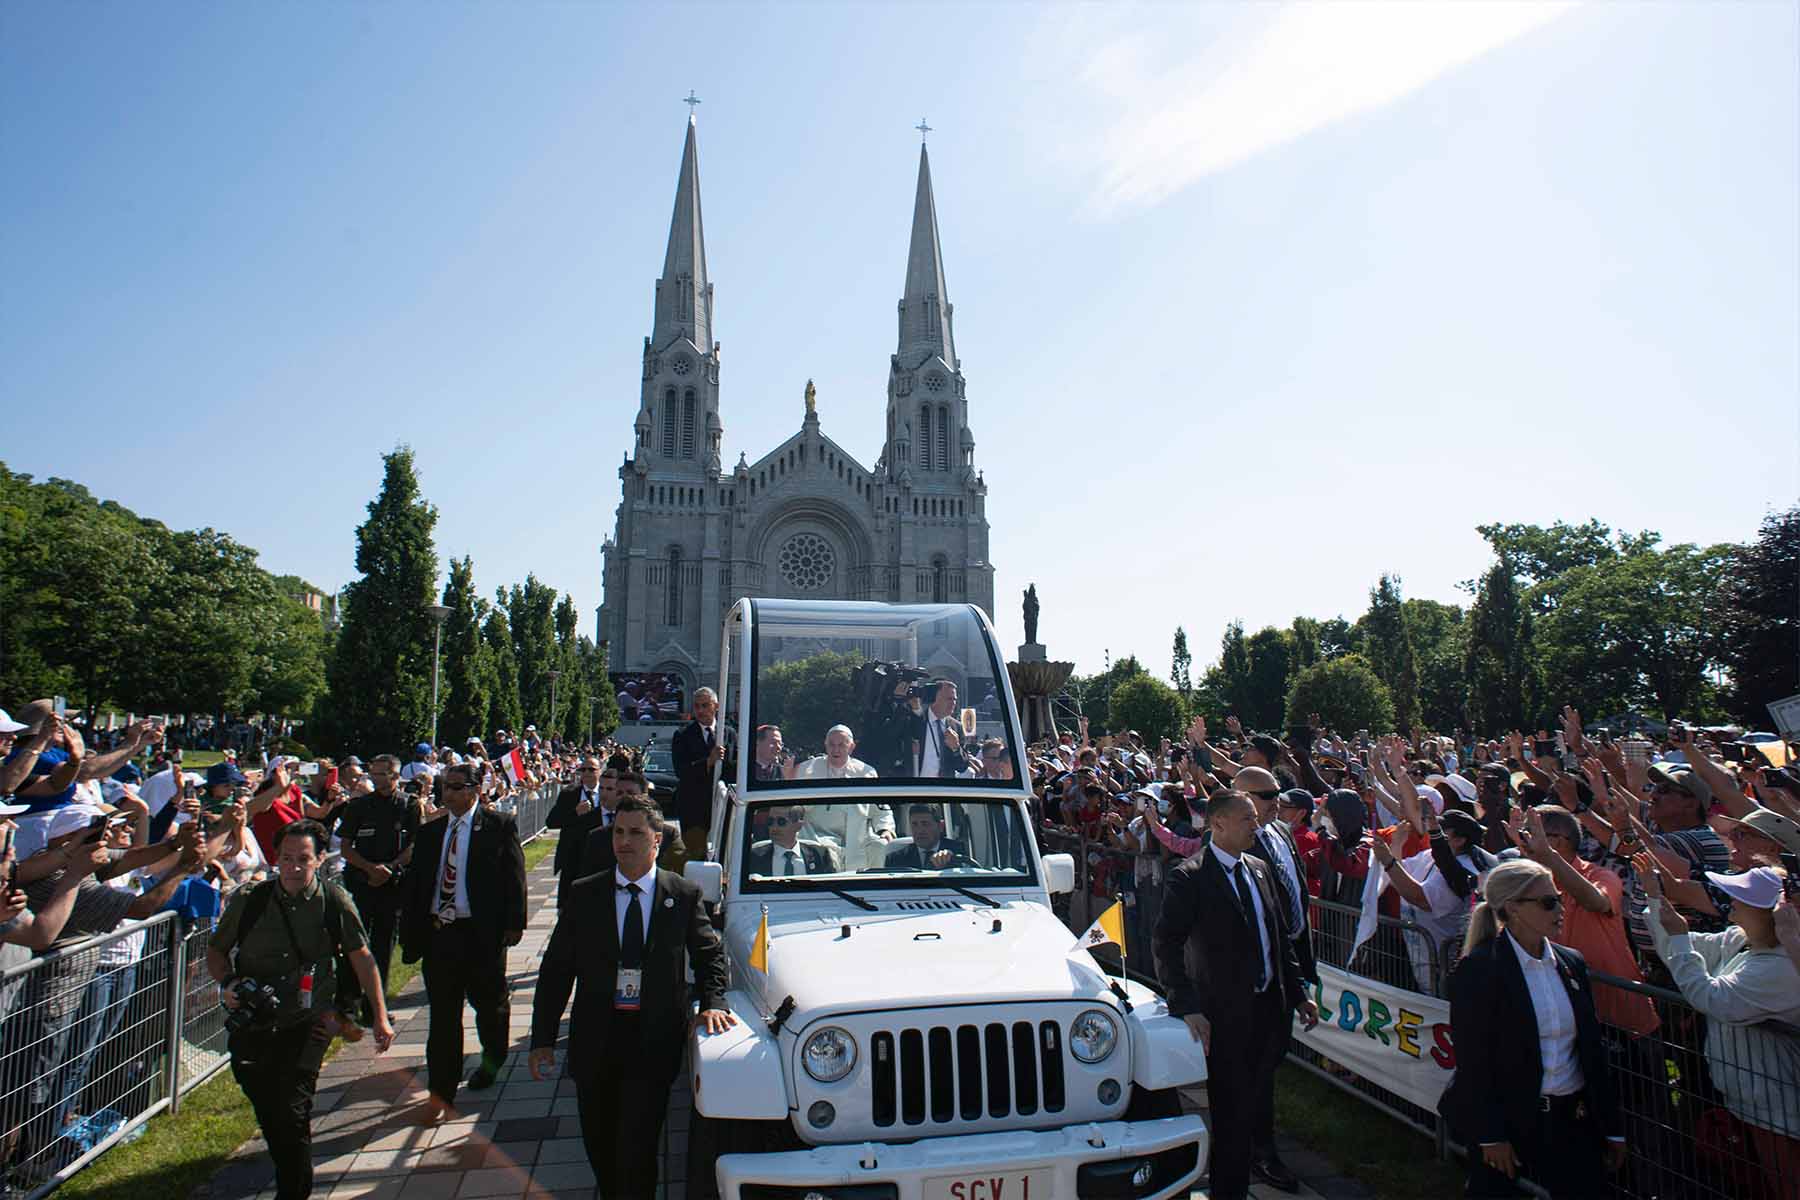 A photo of Pope Francis blessing the crowd outside the Shrine of Sainte-Anne-de- Beaupré, Quebec while riding a Popemobile.